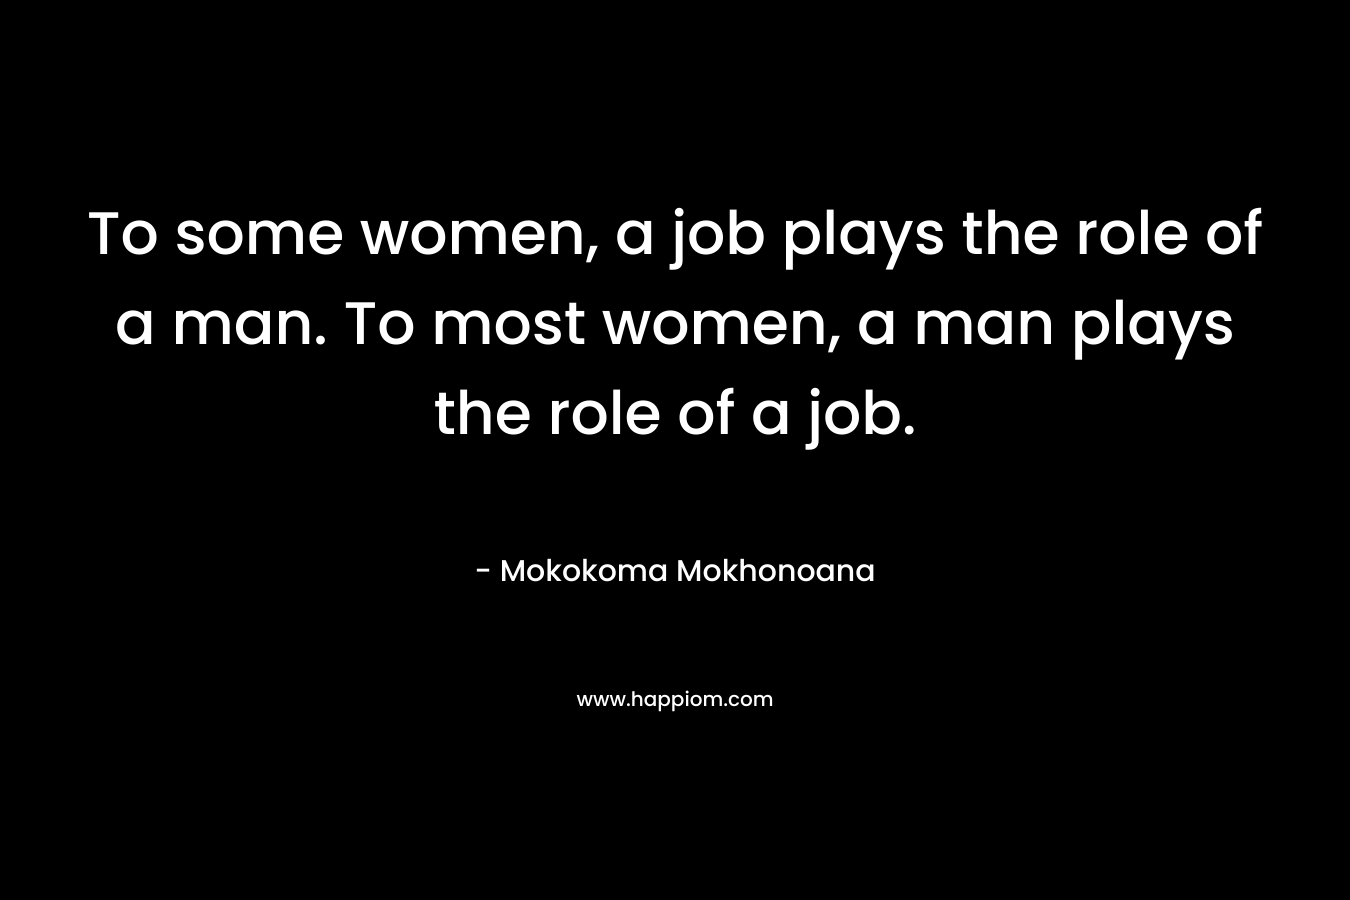 To some women, a job plays the role of a man. To most women, a man plays the role of a job.